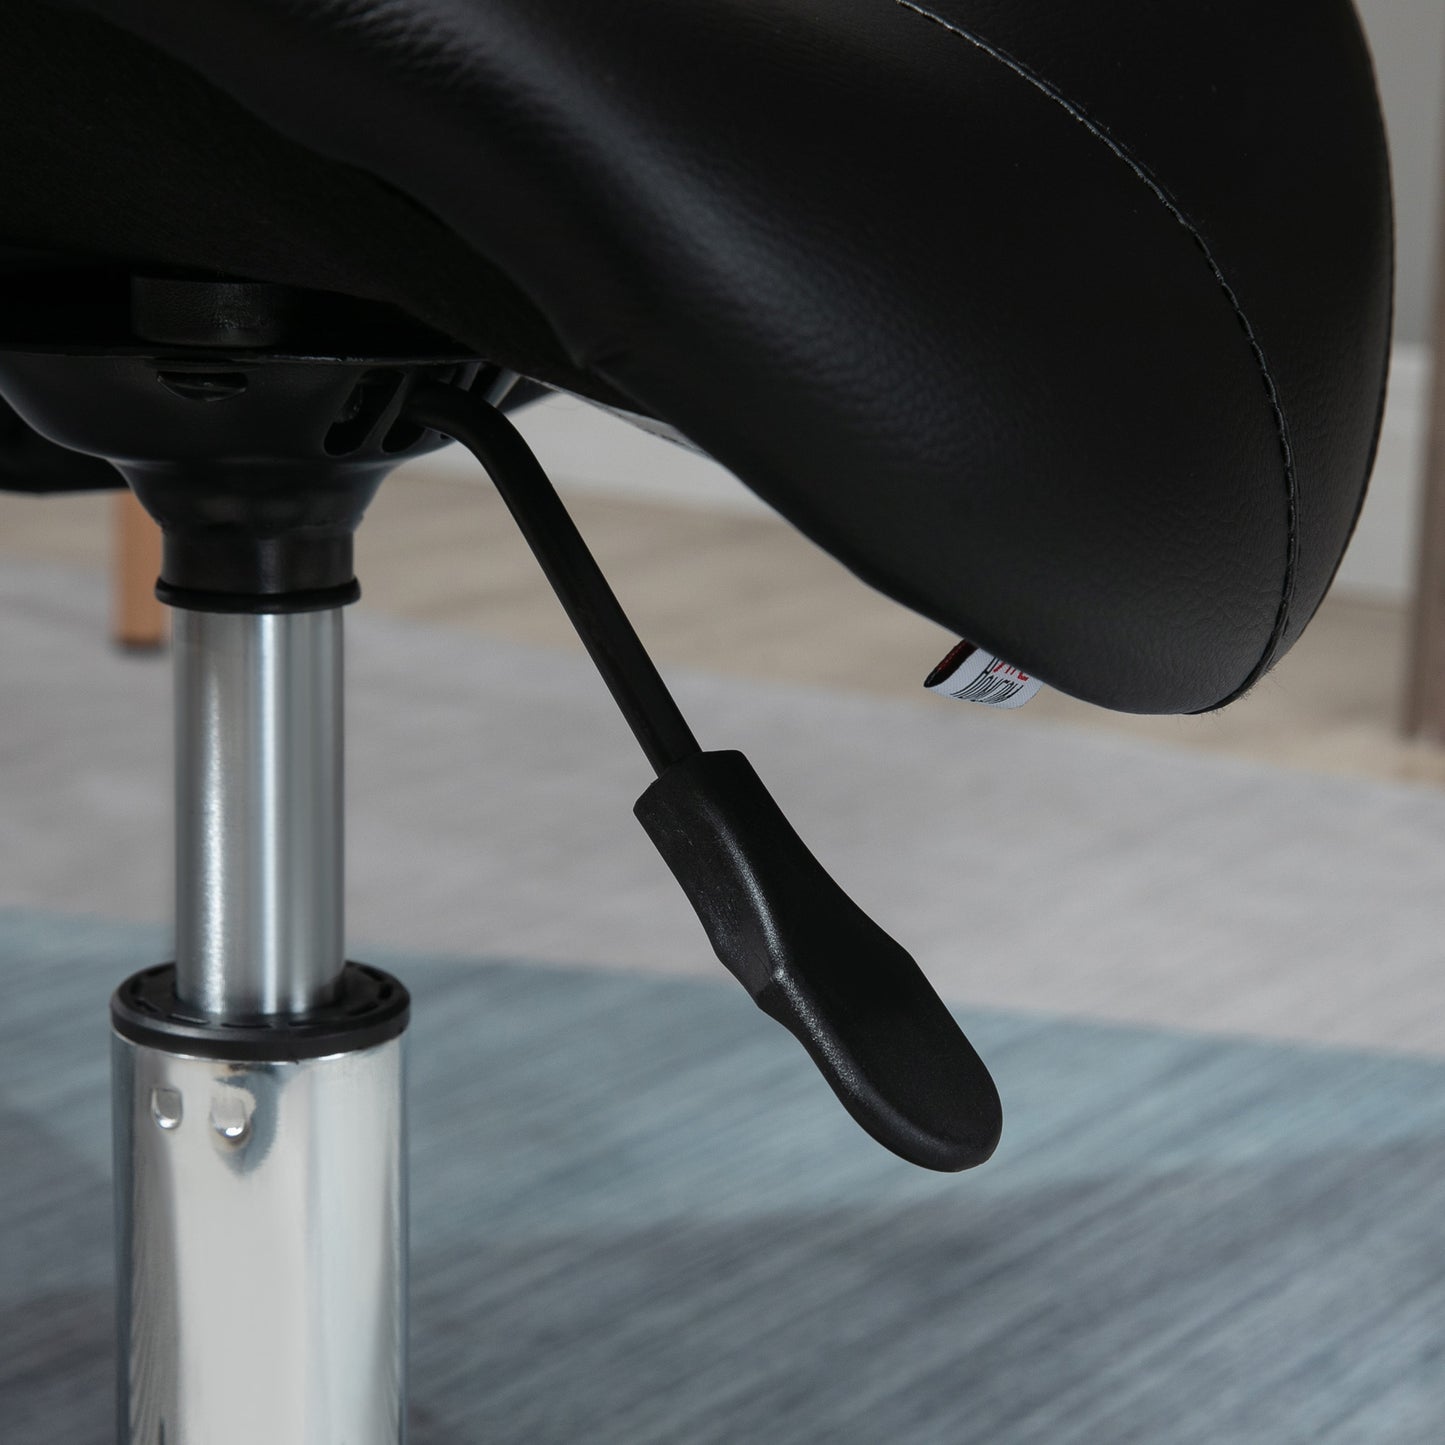 Twin Tiltable Saddle Stool with 360 Degree Arm Support | Sit Healthier